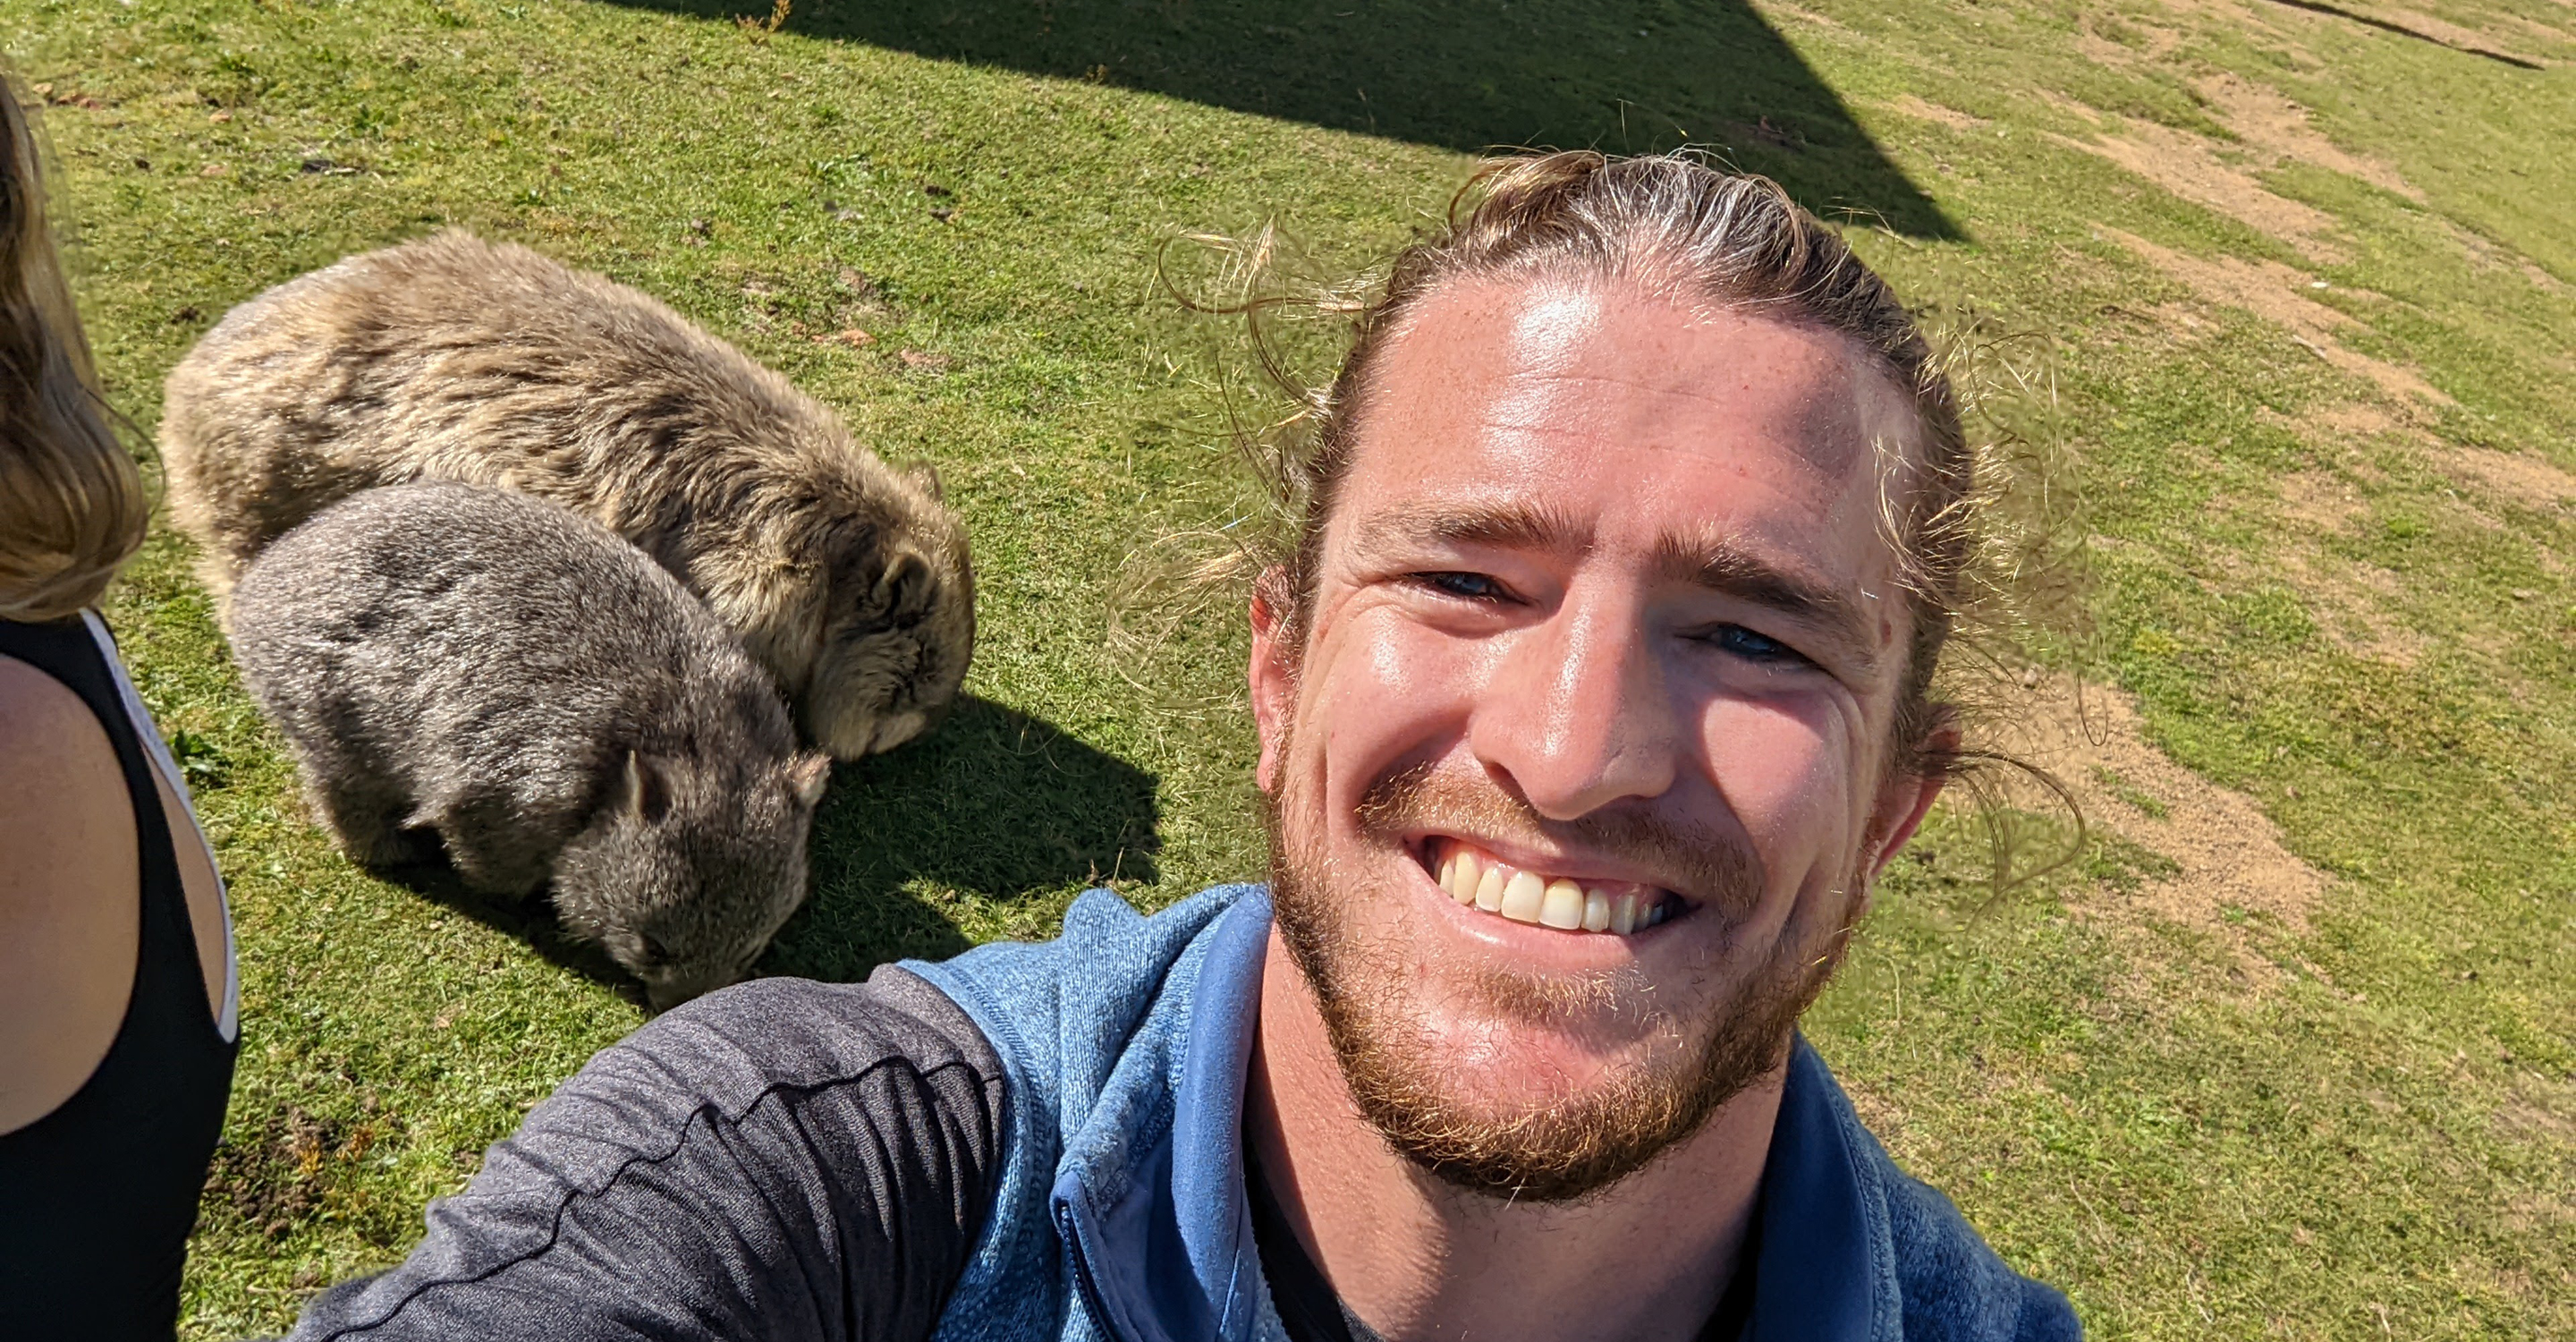 Hanging out with wombats in Tasmania.